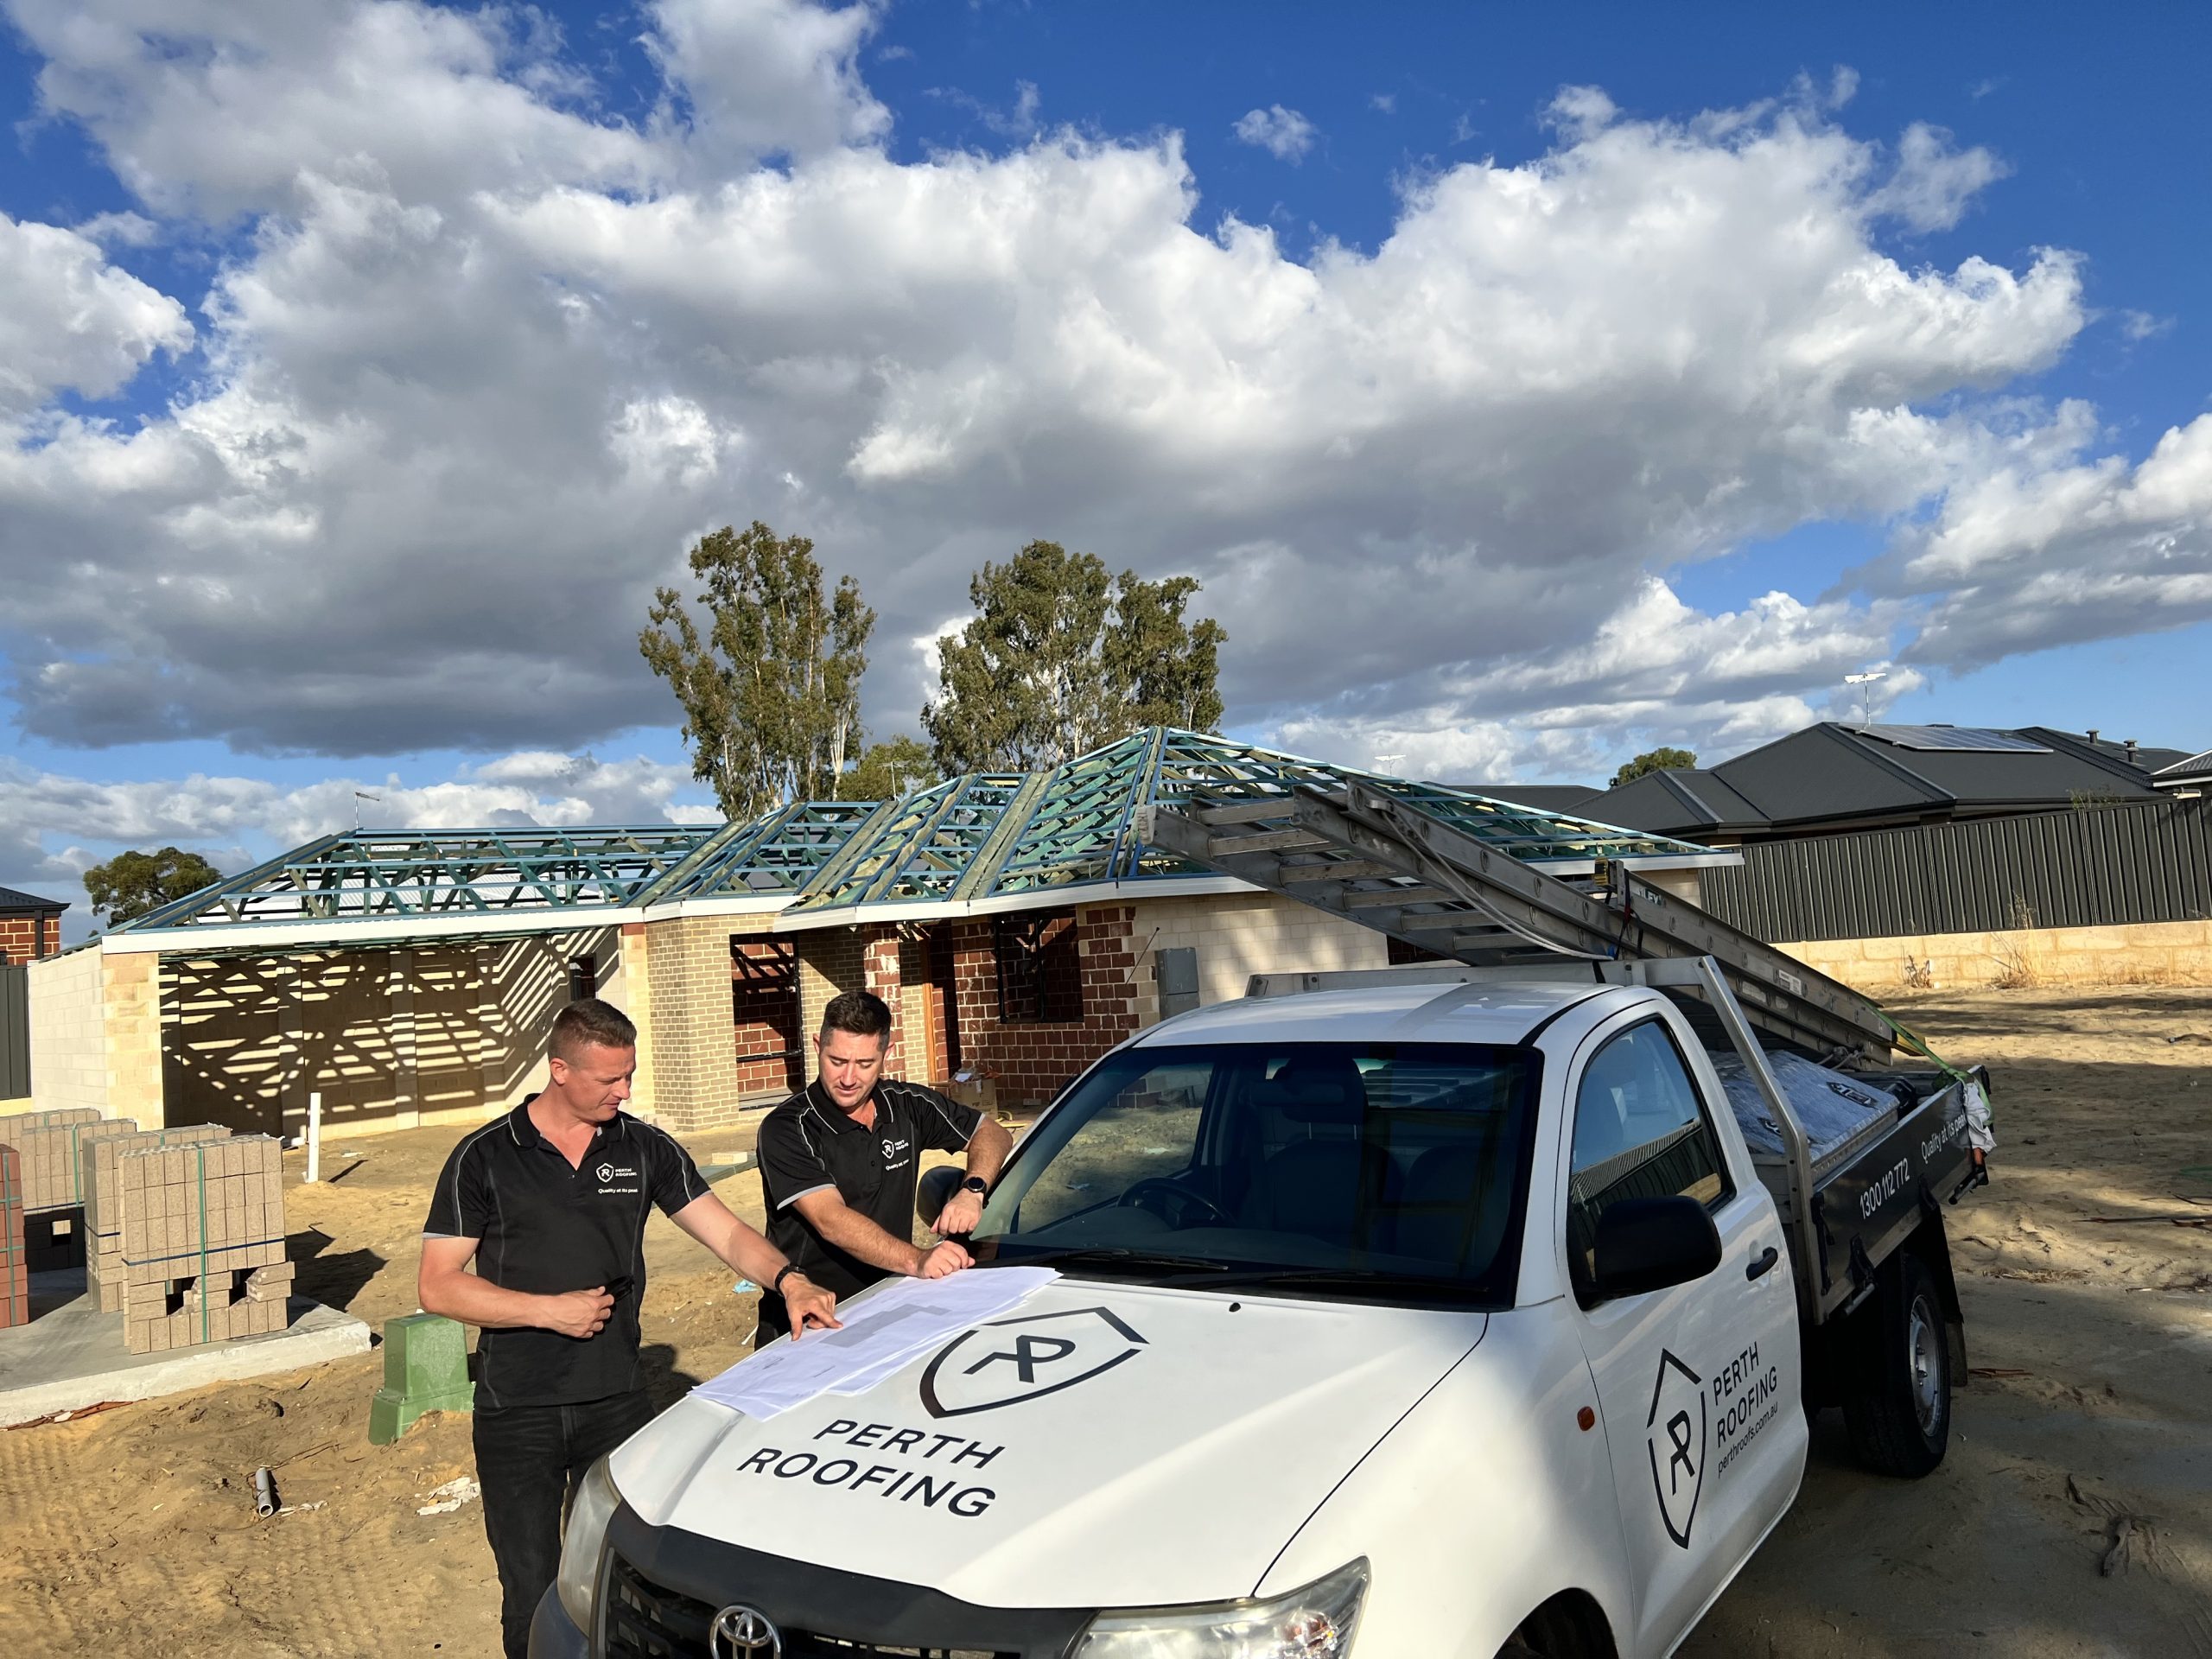 Perth Roofing on site